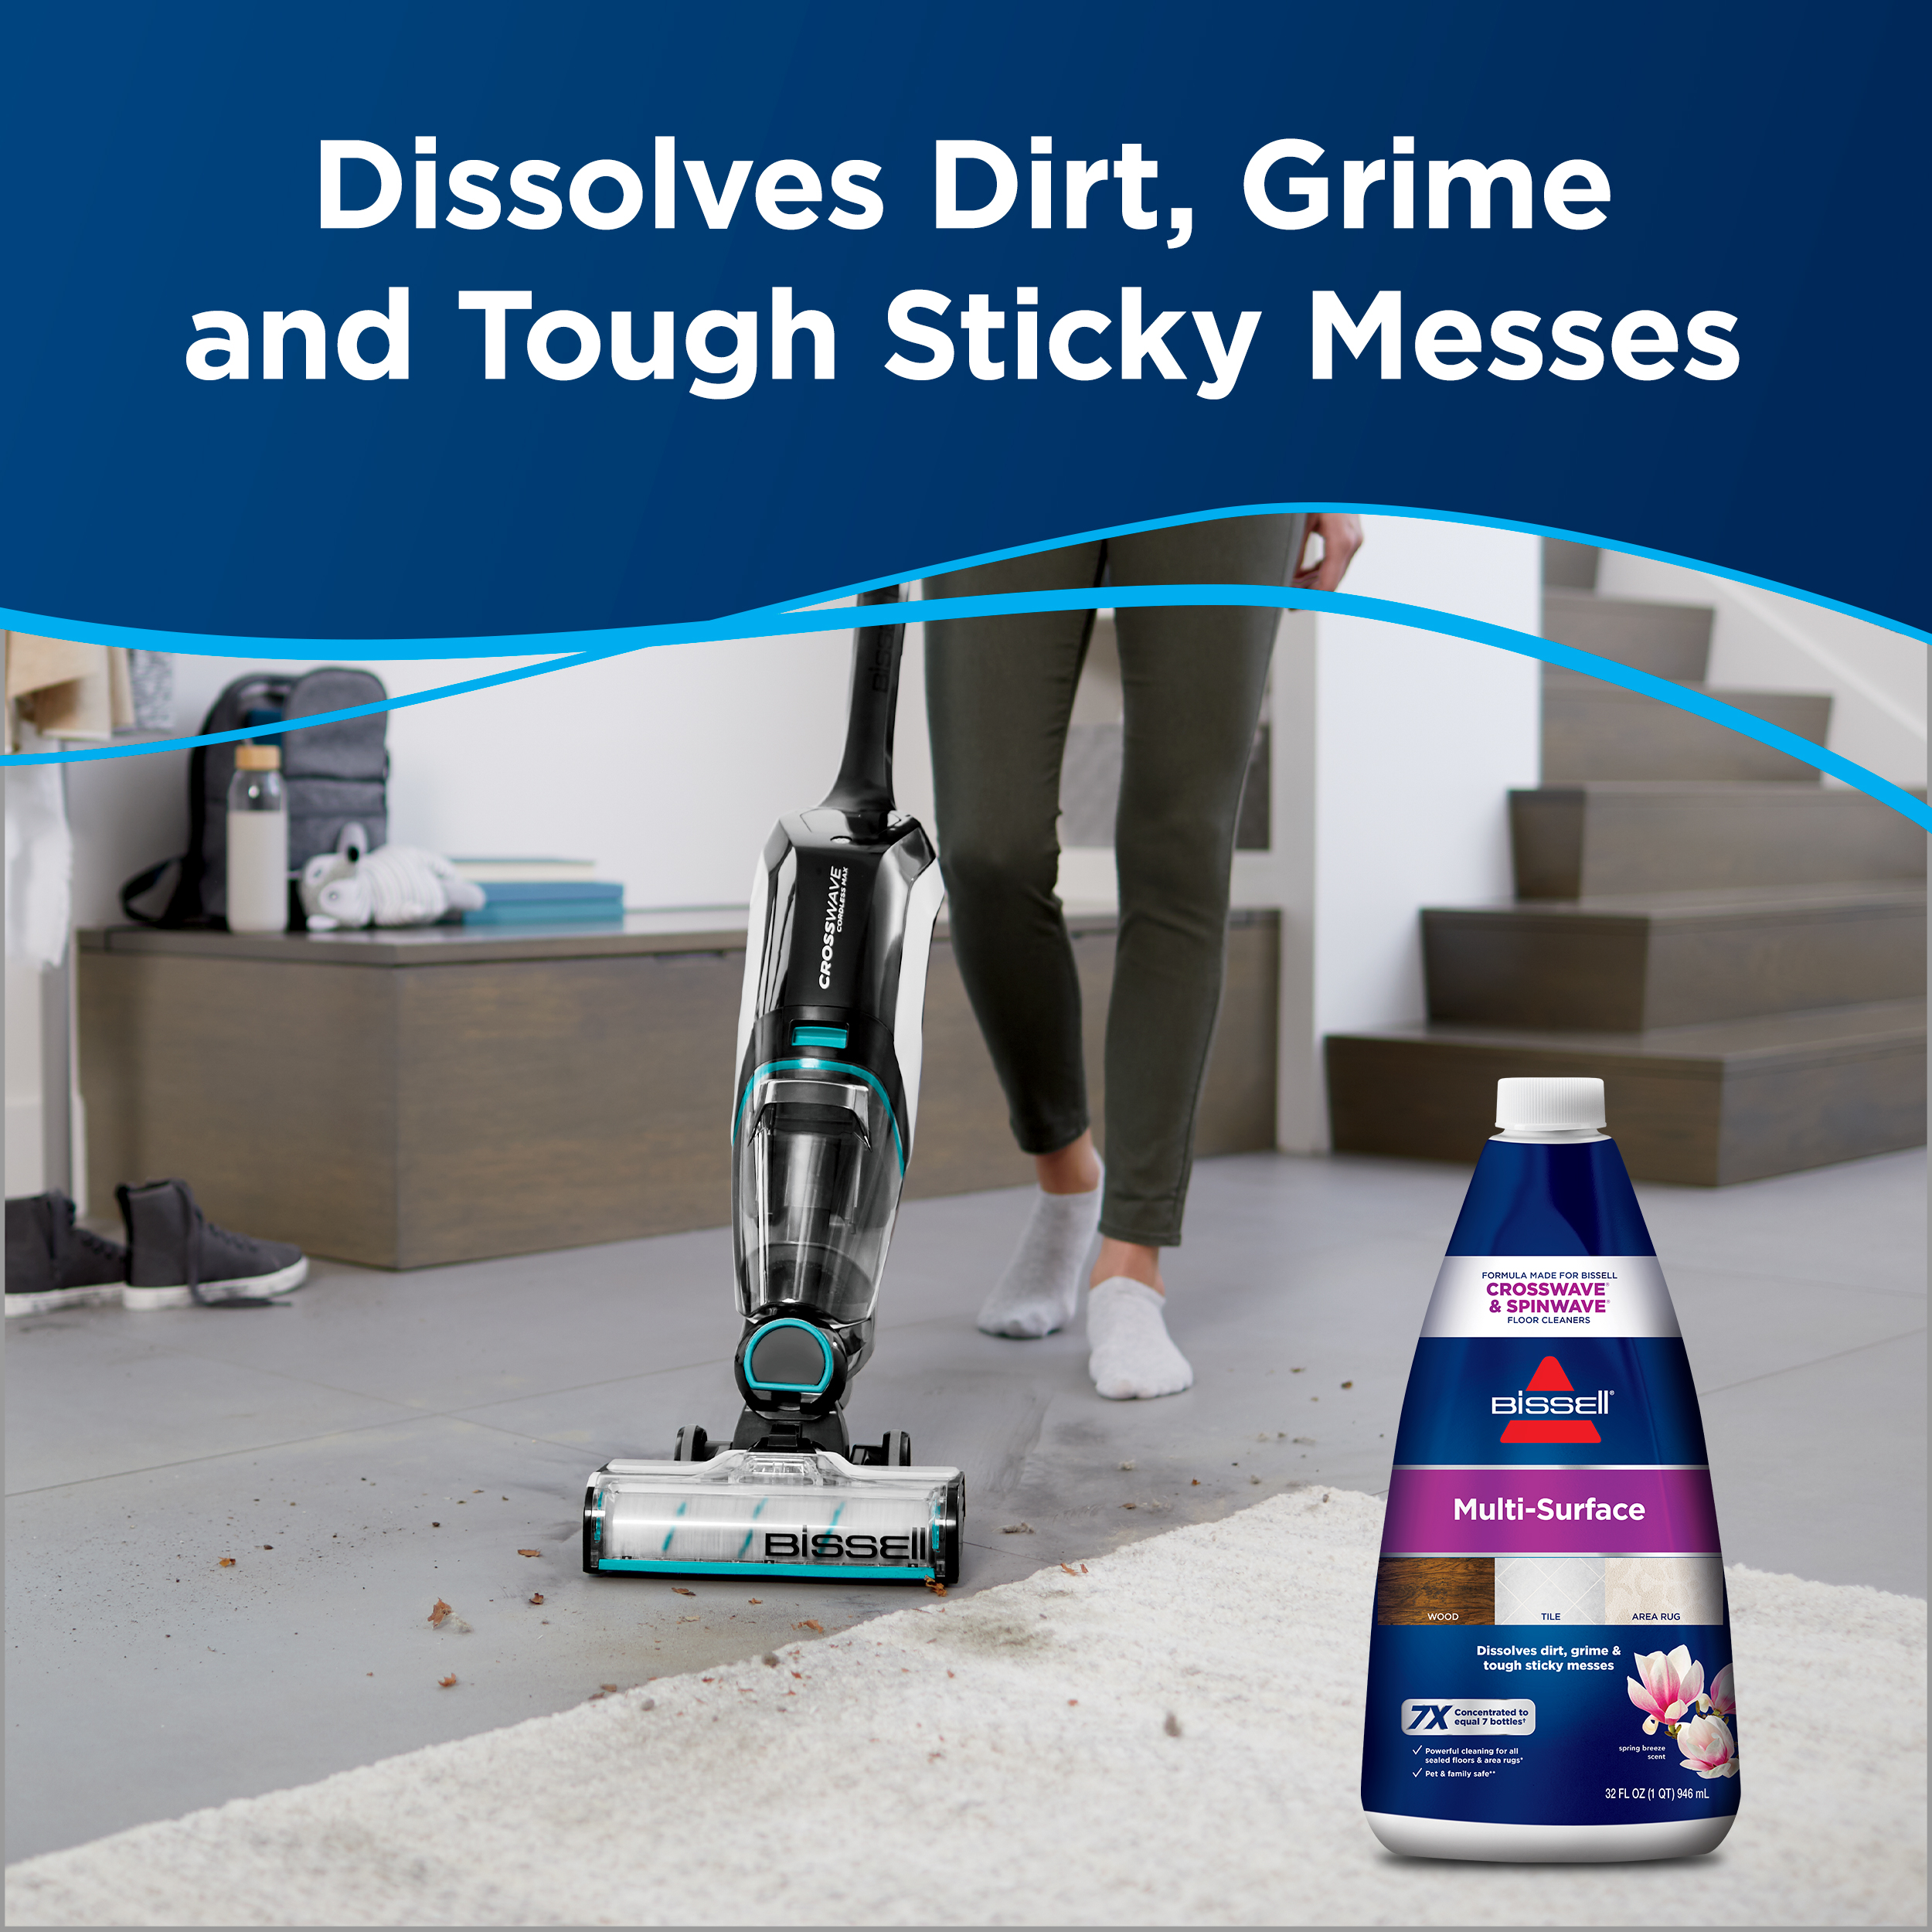 Bissell Multi-Surface Floor Cleaning Formula, Spring Breeze Scent, 32 oz., 1789 - image 1 of 7